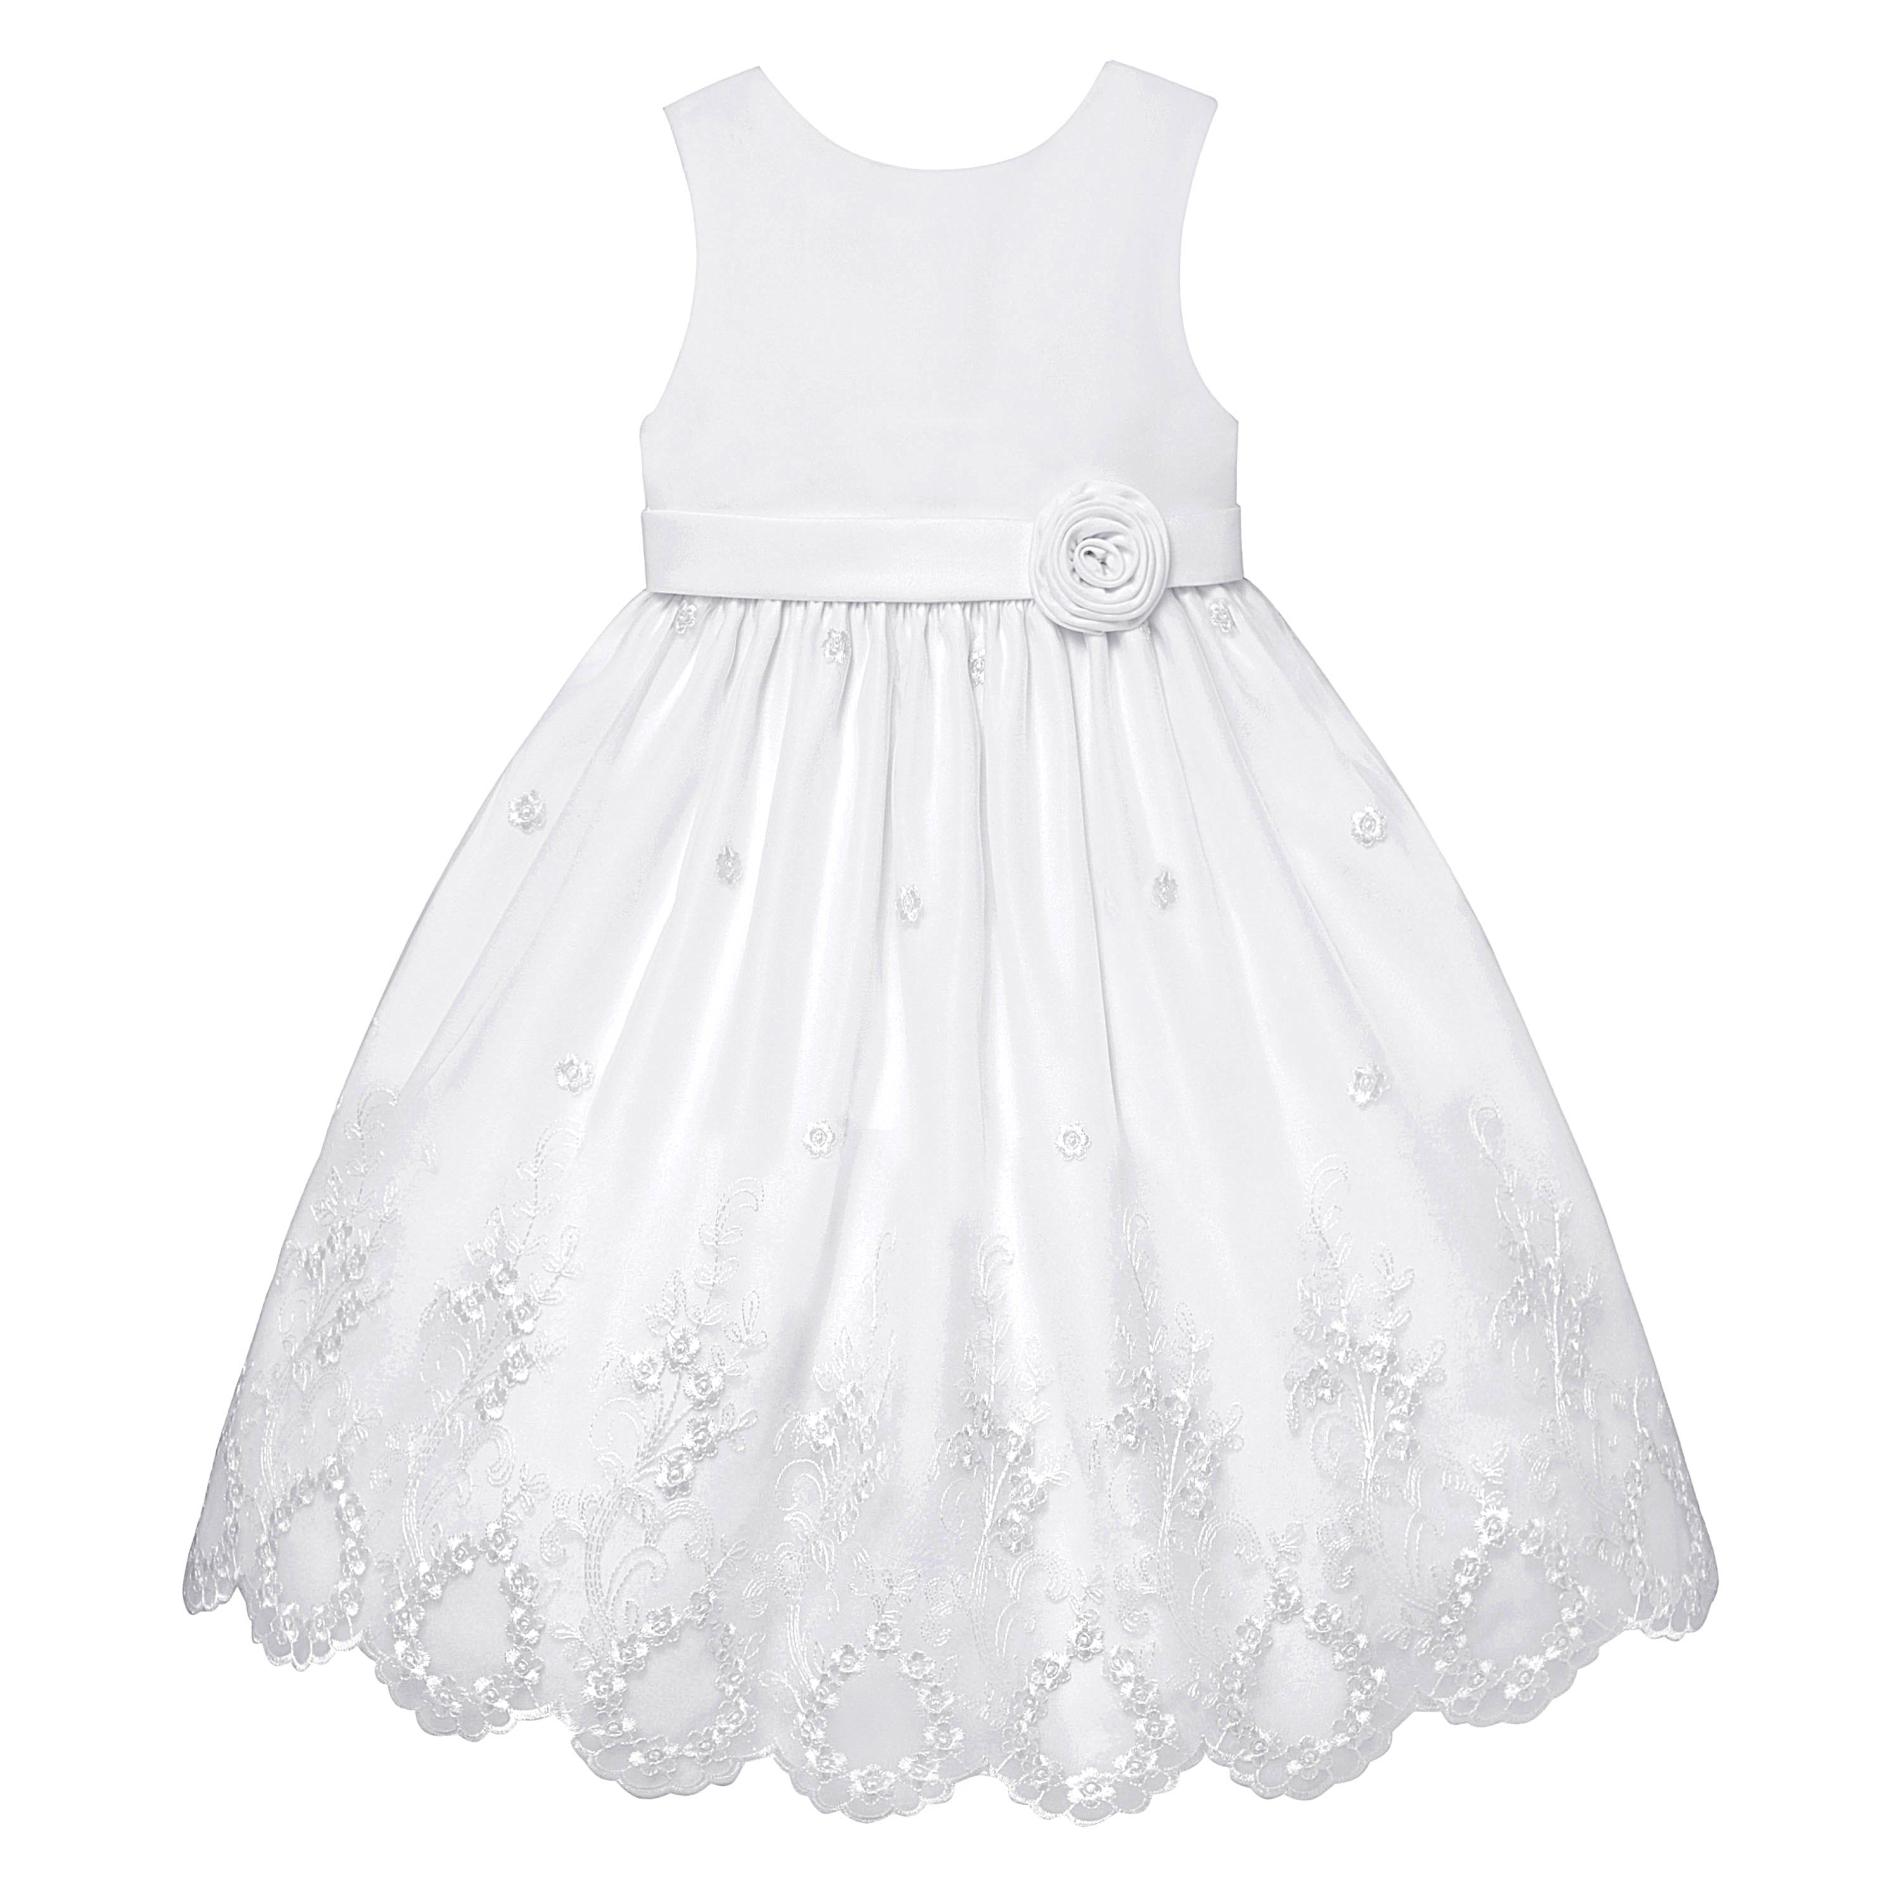 American Princess Infant & Toddler Girl's Embroidered Party Dress